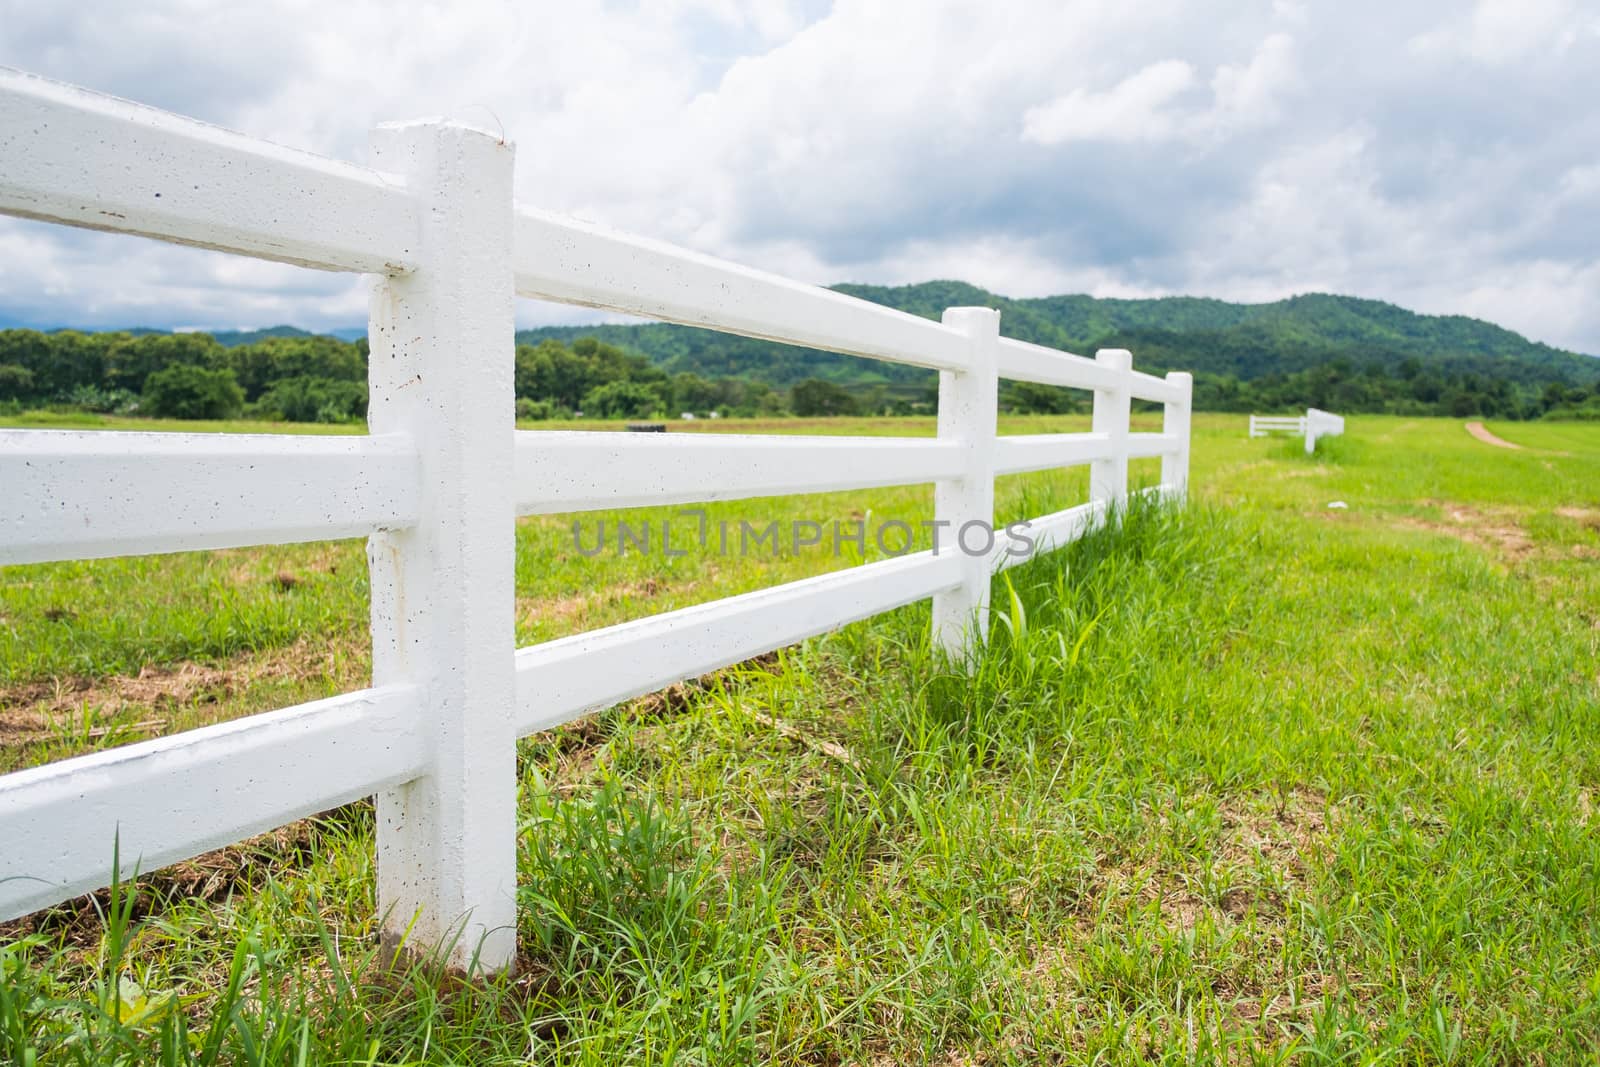 white fence in farm field and overcast sky